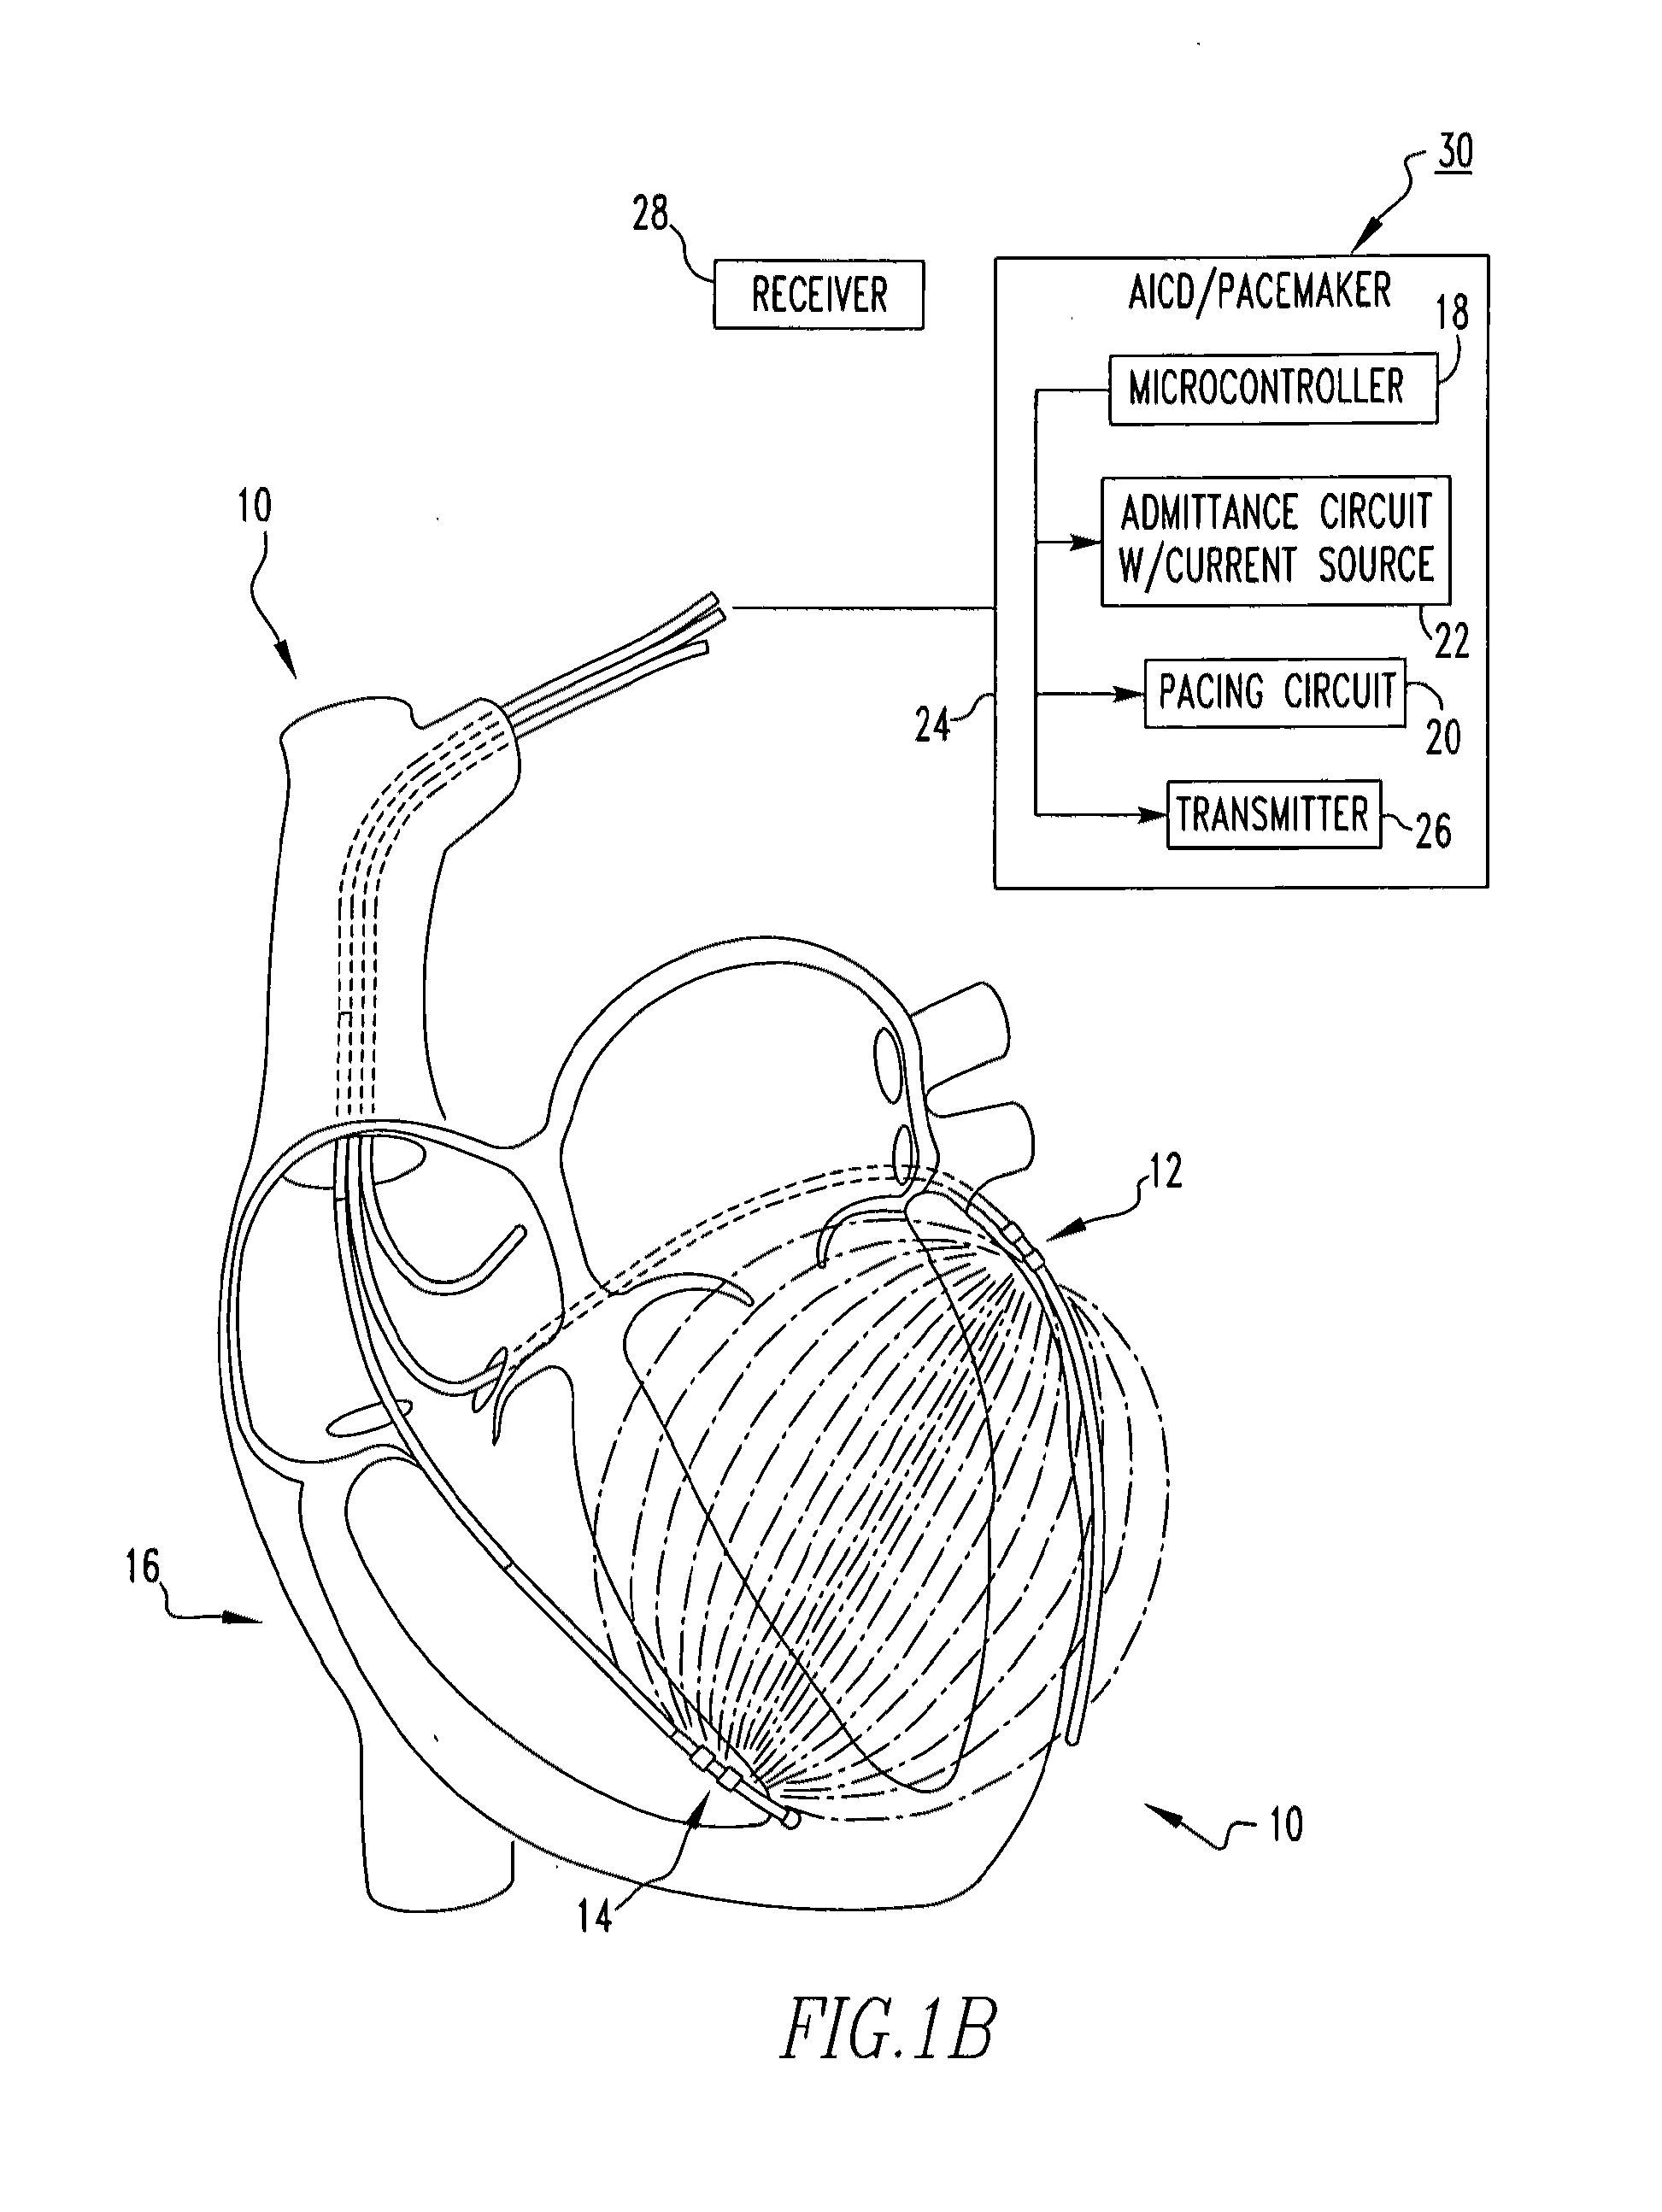 Admittance measurement for tuning bi-ventricular pacemakers